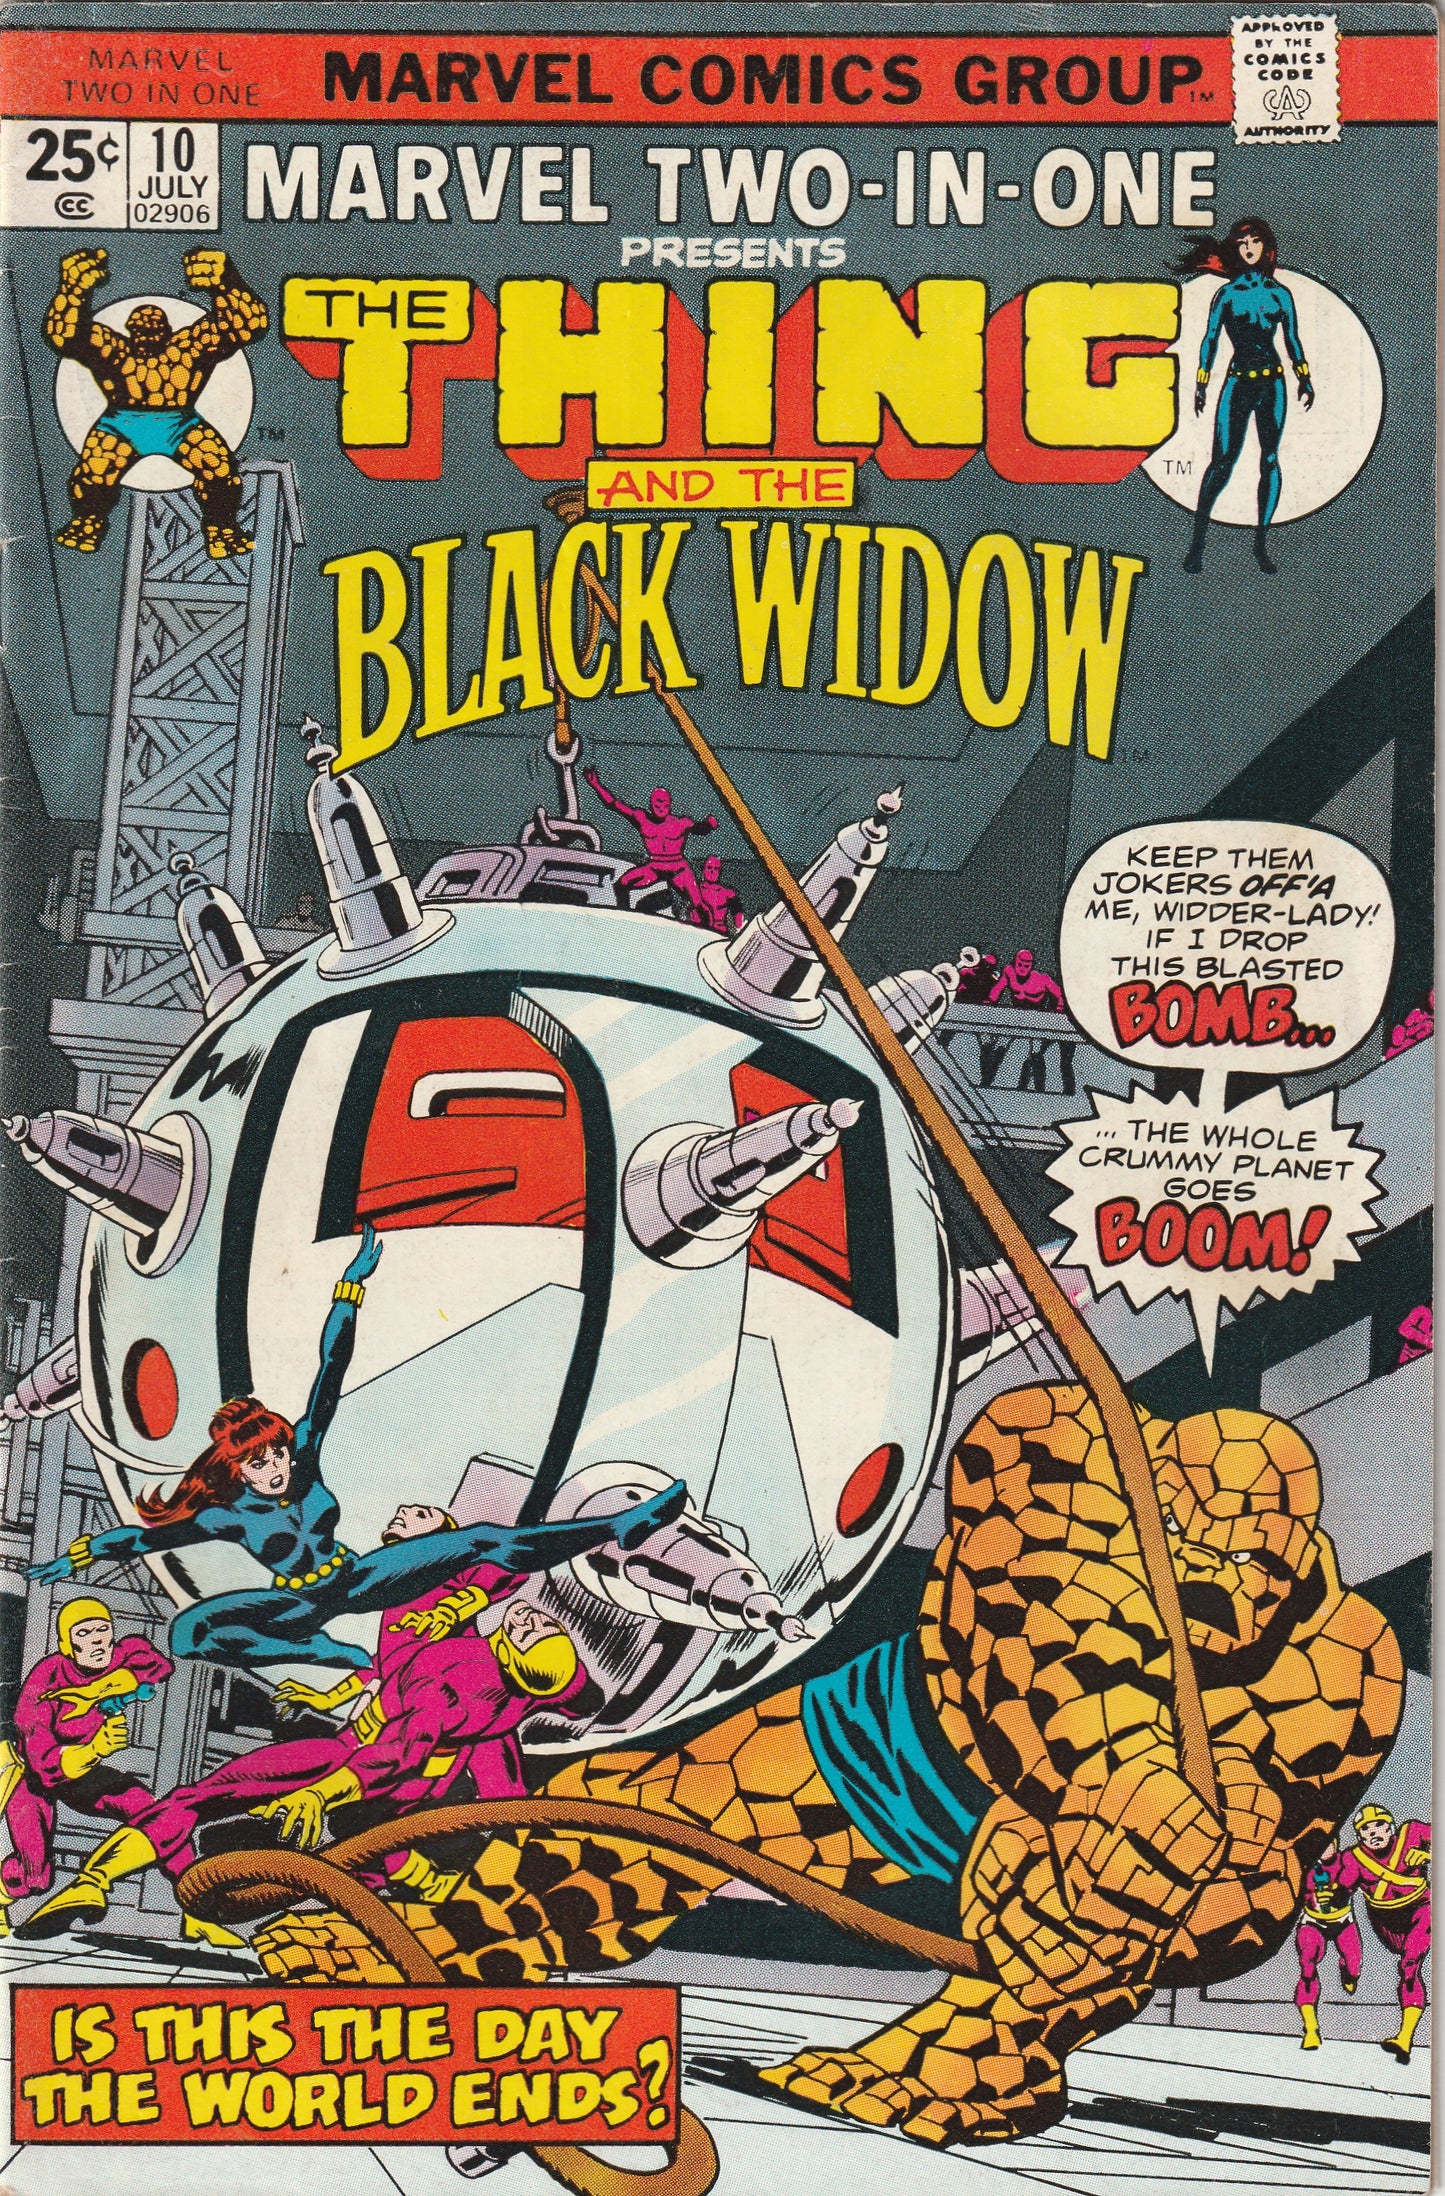 Marvel Two-in-One #10 (1975) - The Thing and Black Widow